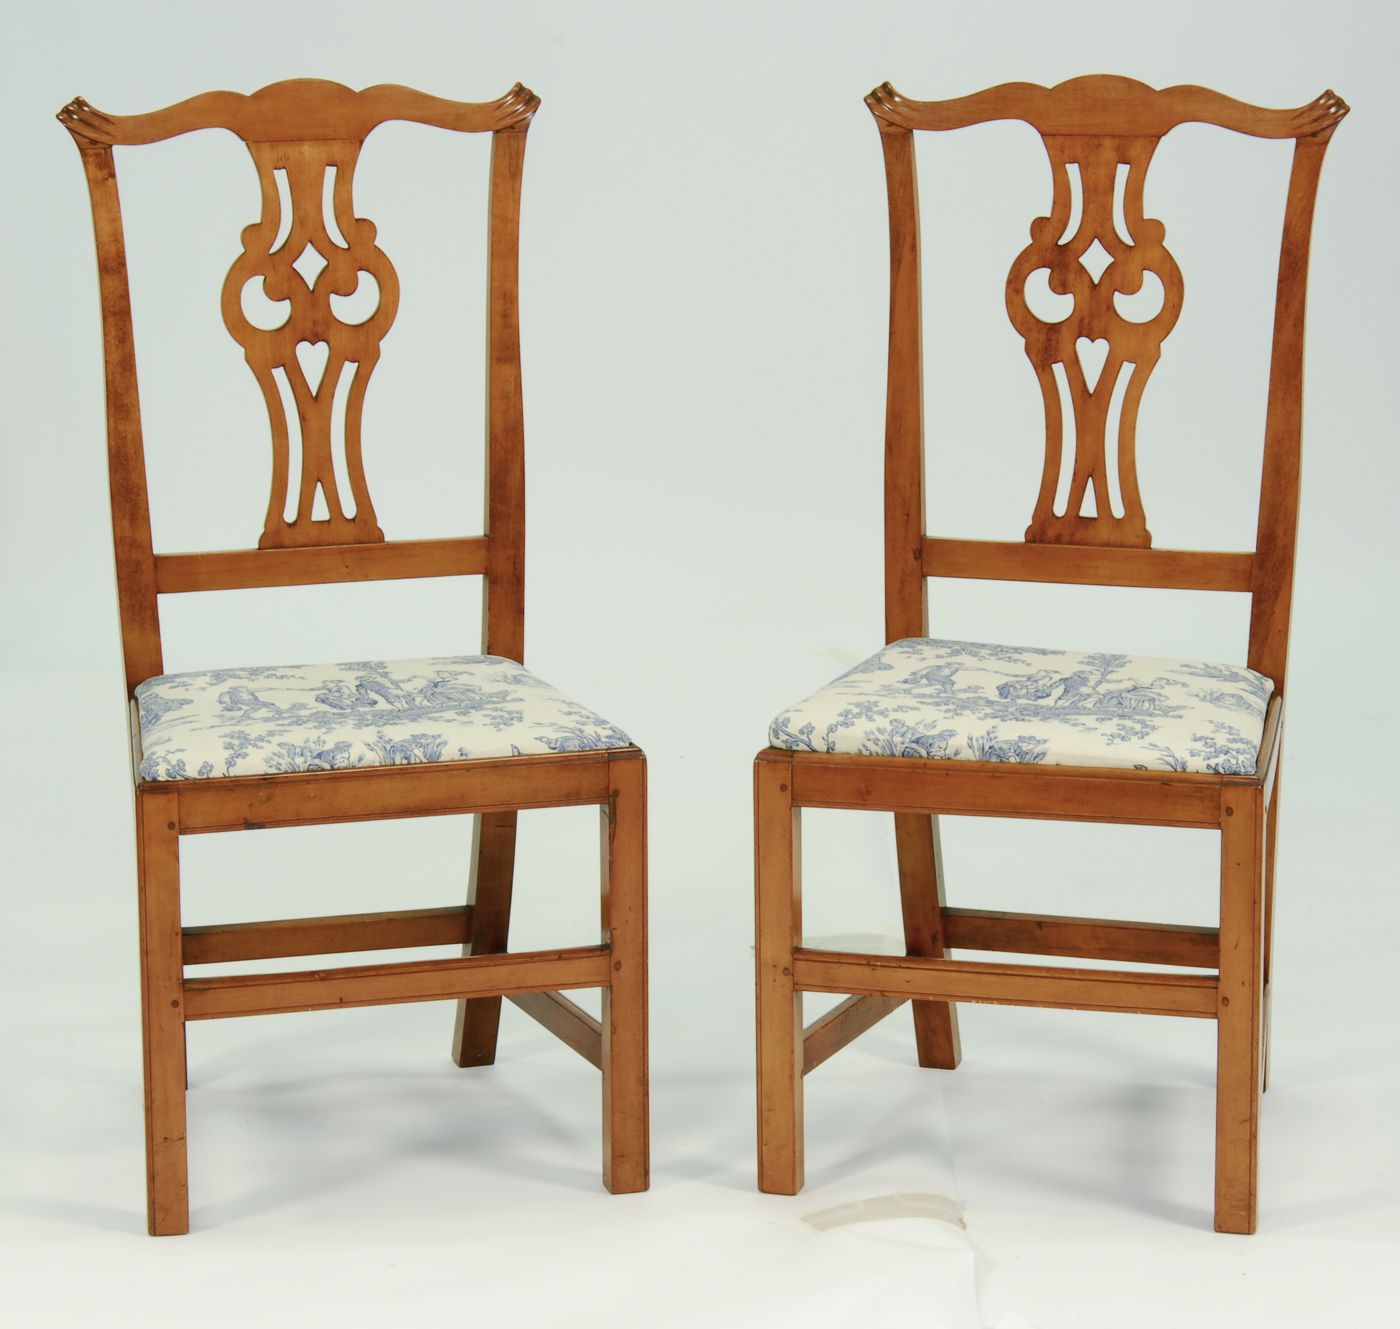 PAIR OF ANTIQUE AMERICAN COUNTRY 14a993